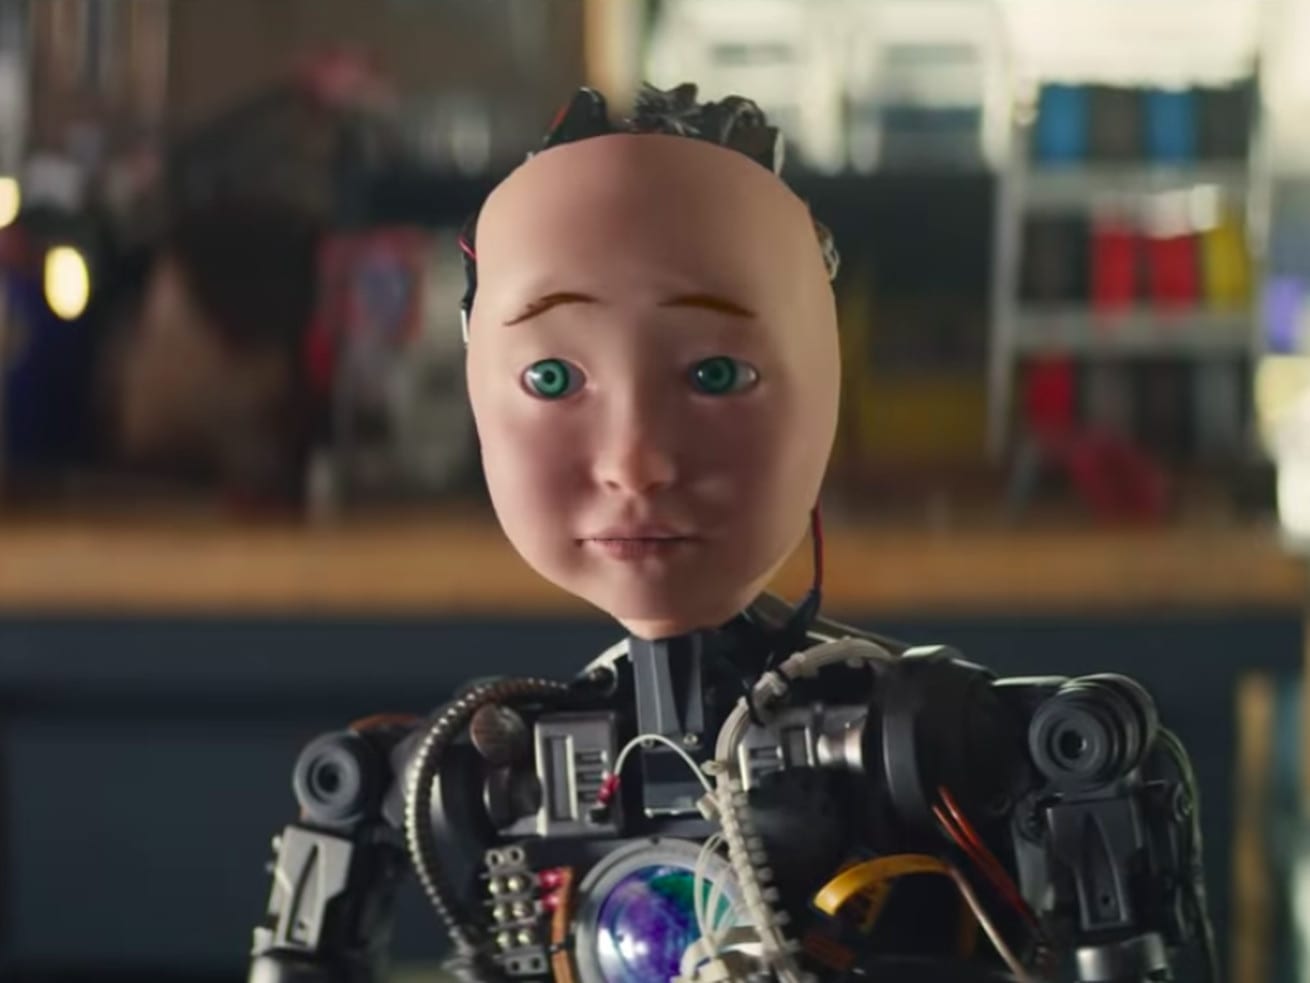 This year’s Super Bowl commercials showed us that tech isn’t that great